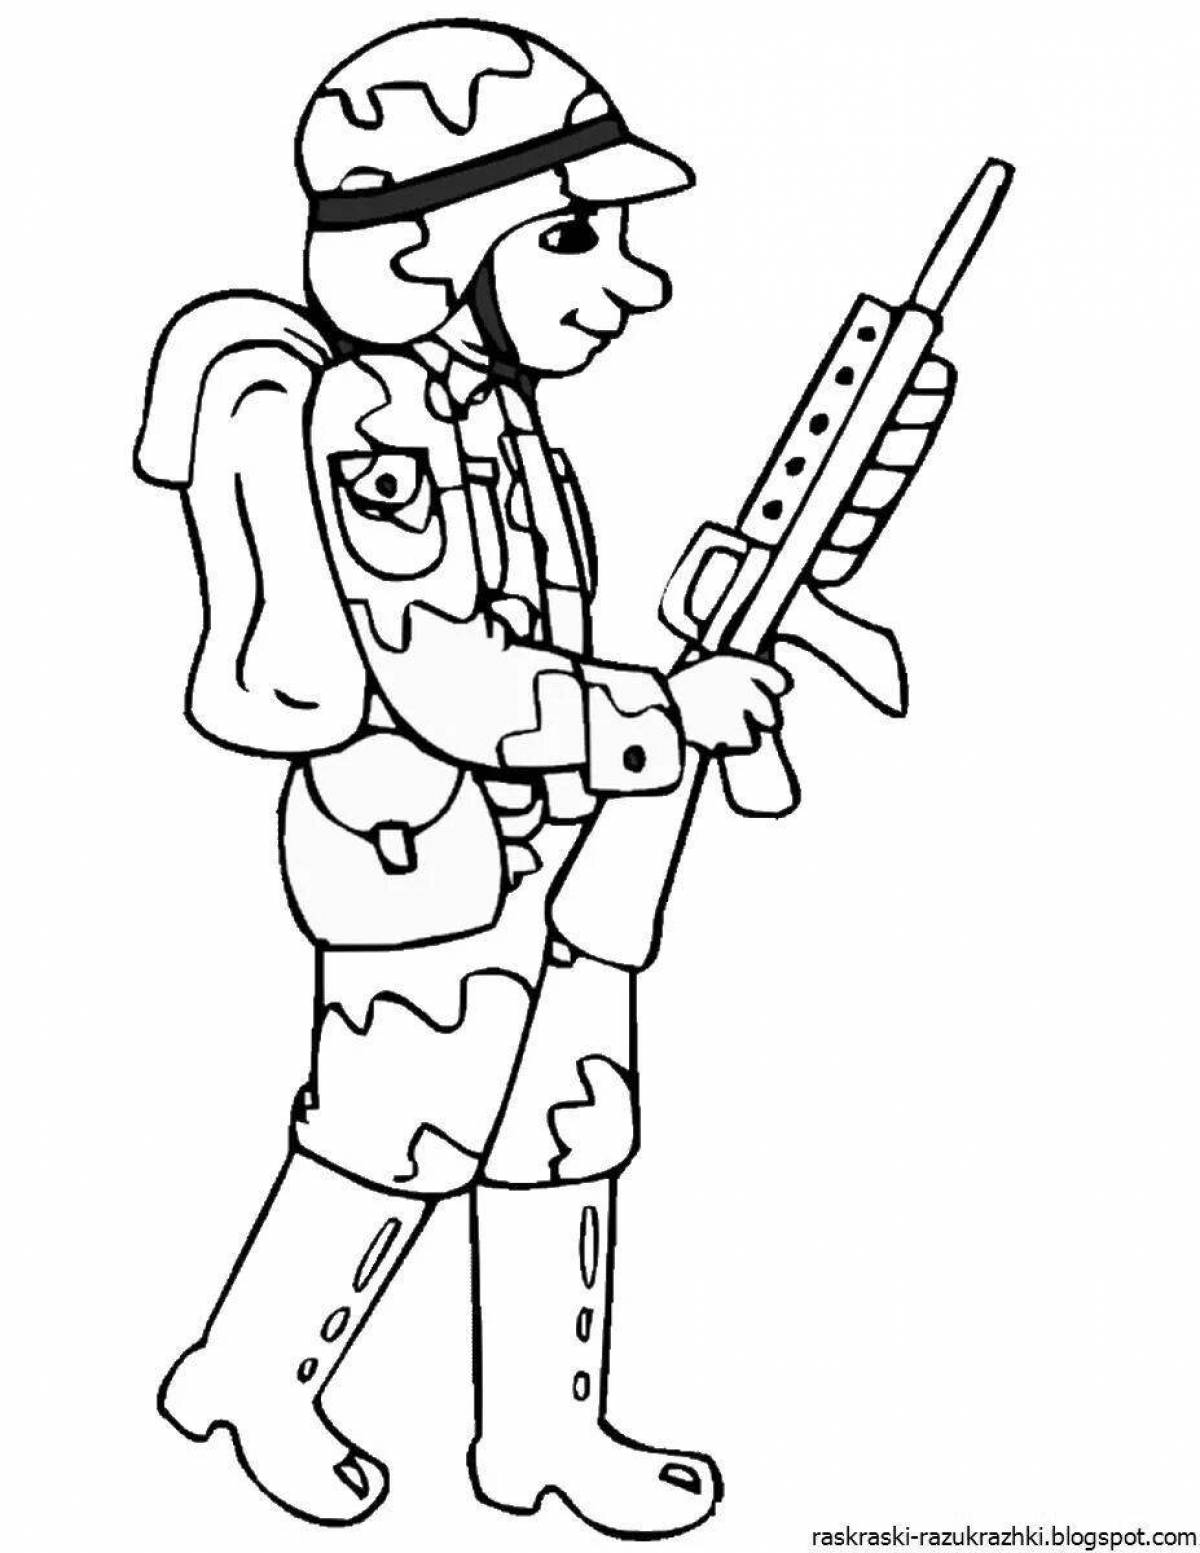 Dynamic toy soldiers coloring for boys